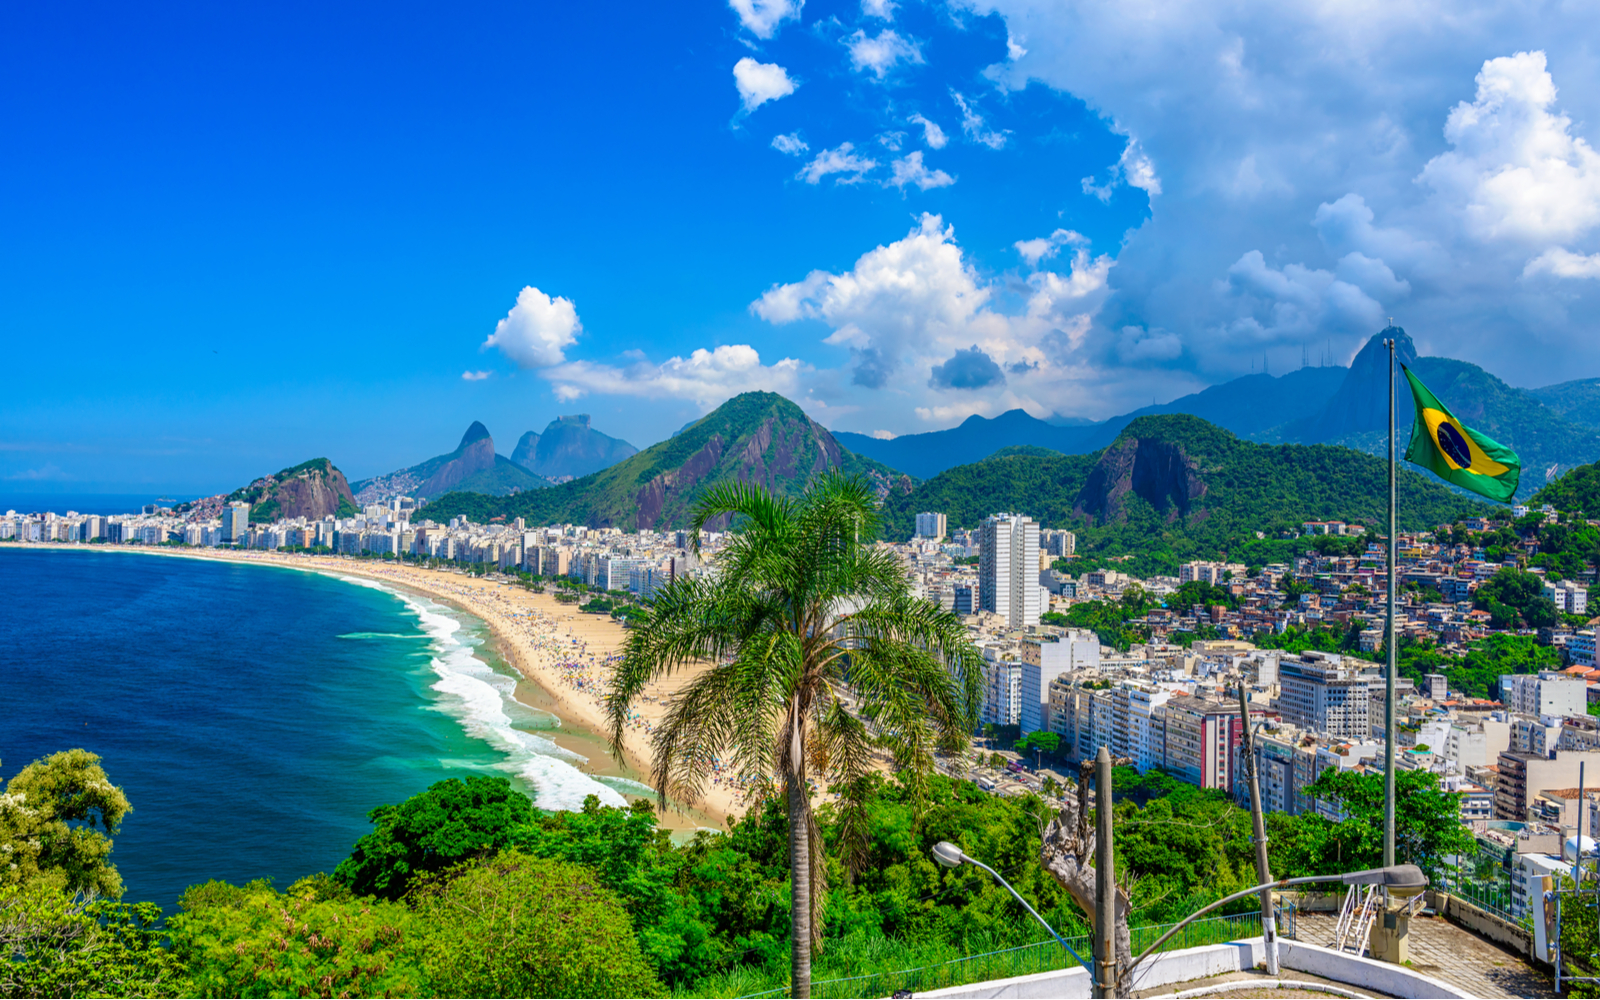 Copacabana beach in Rio de Janiero pictured during the best time to visit Brazil with clear teal water and blue sky